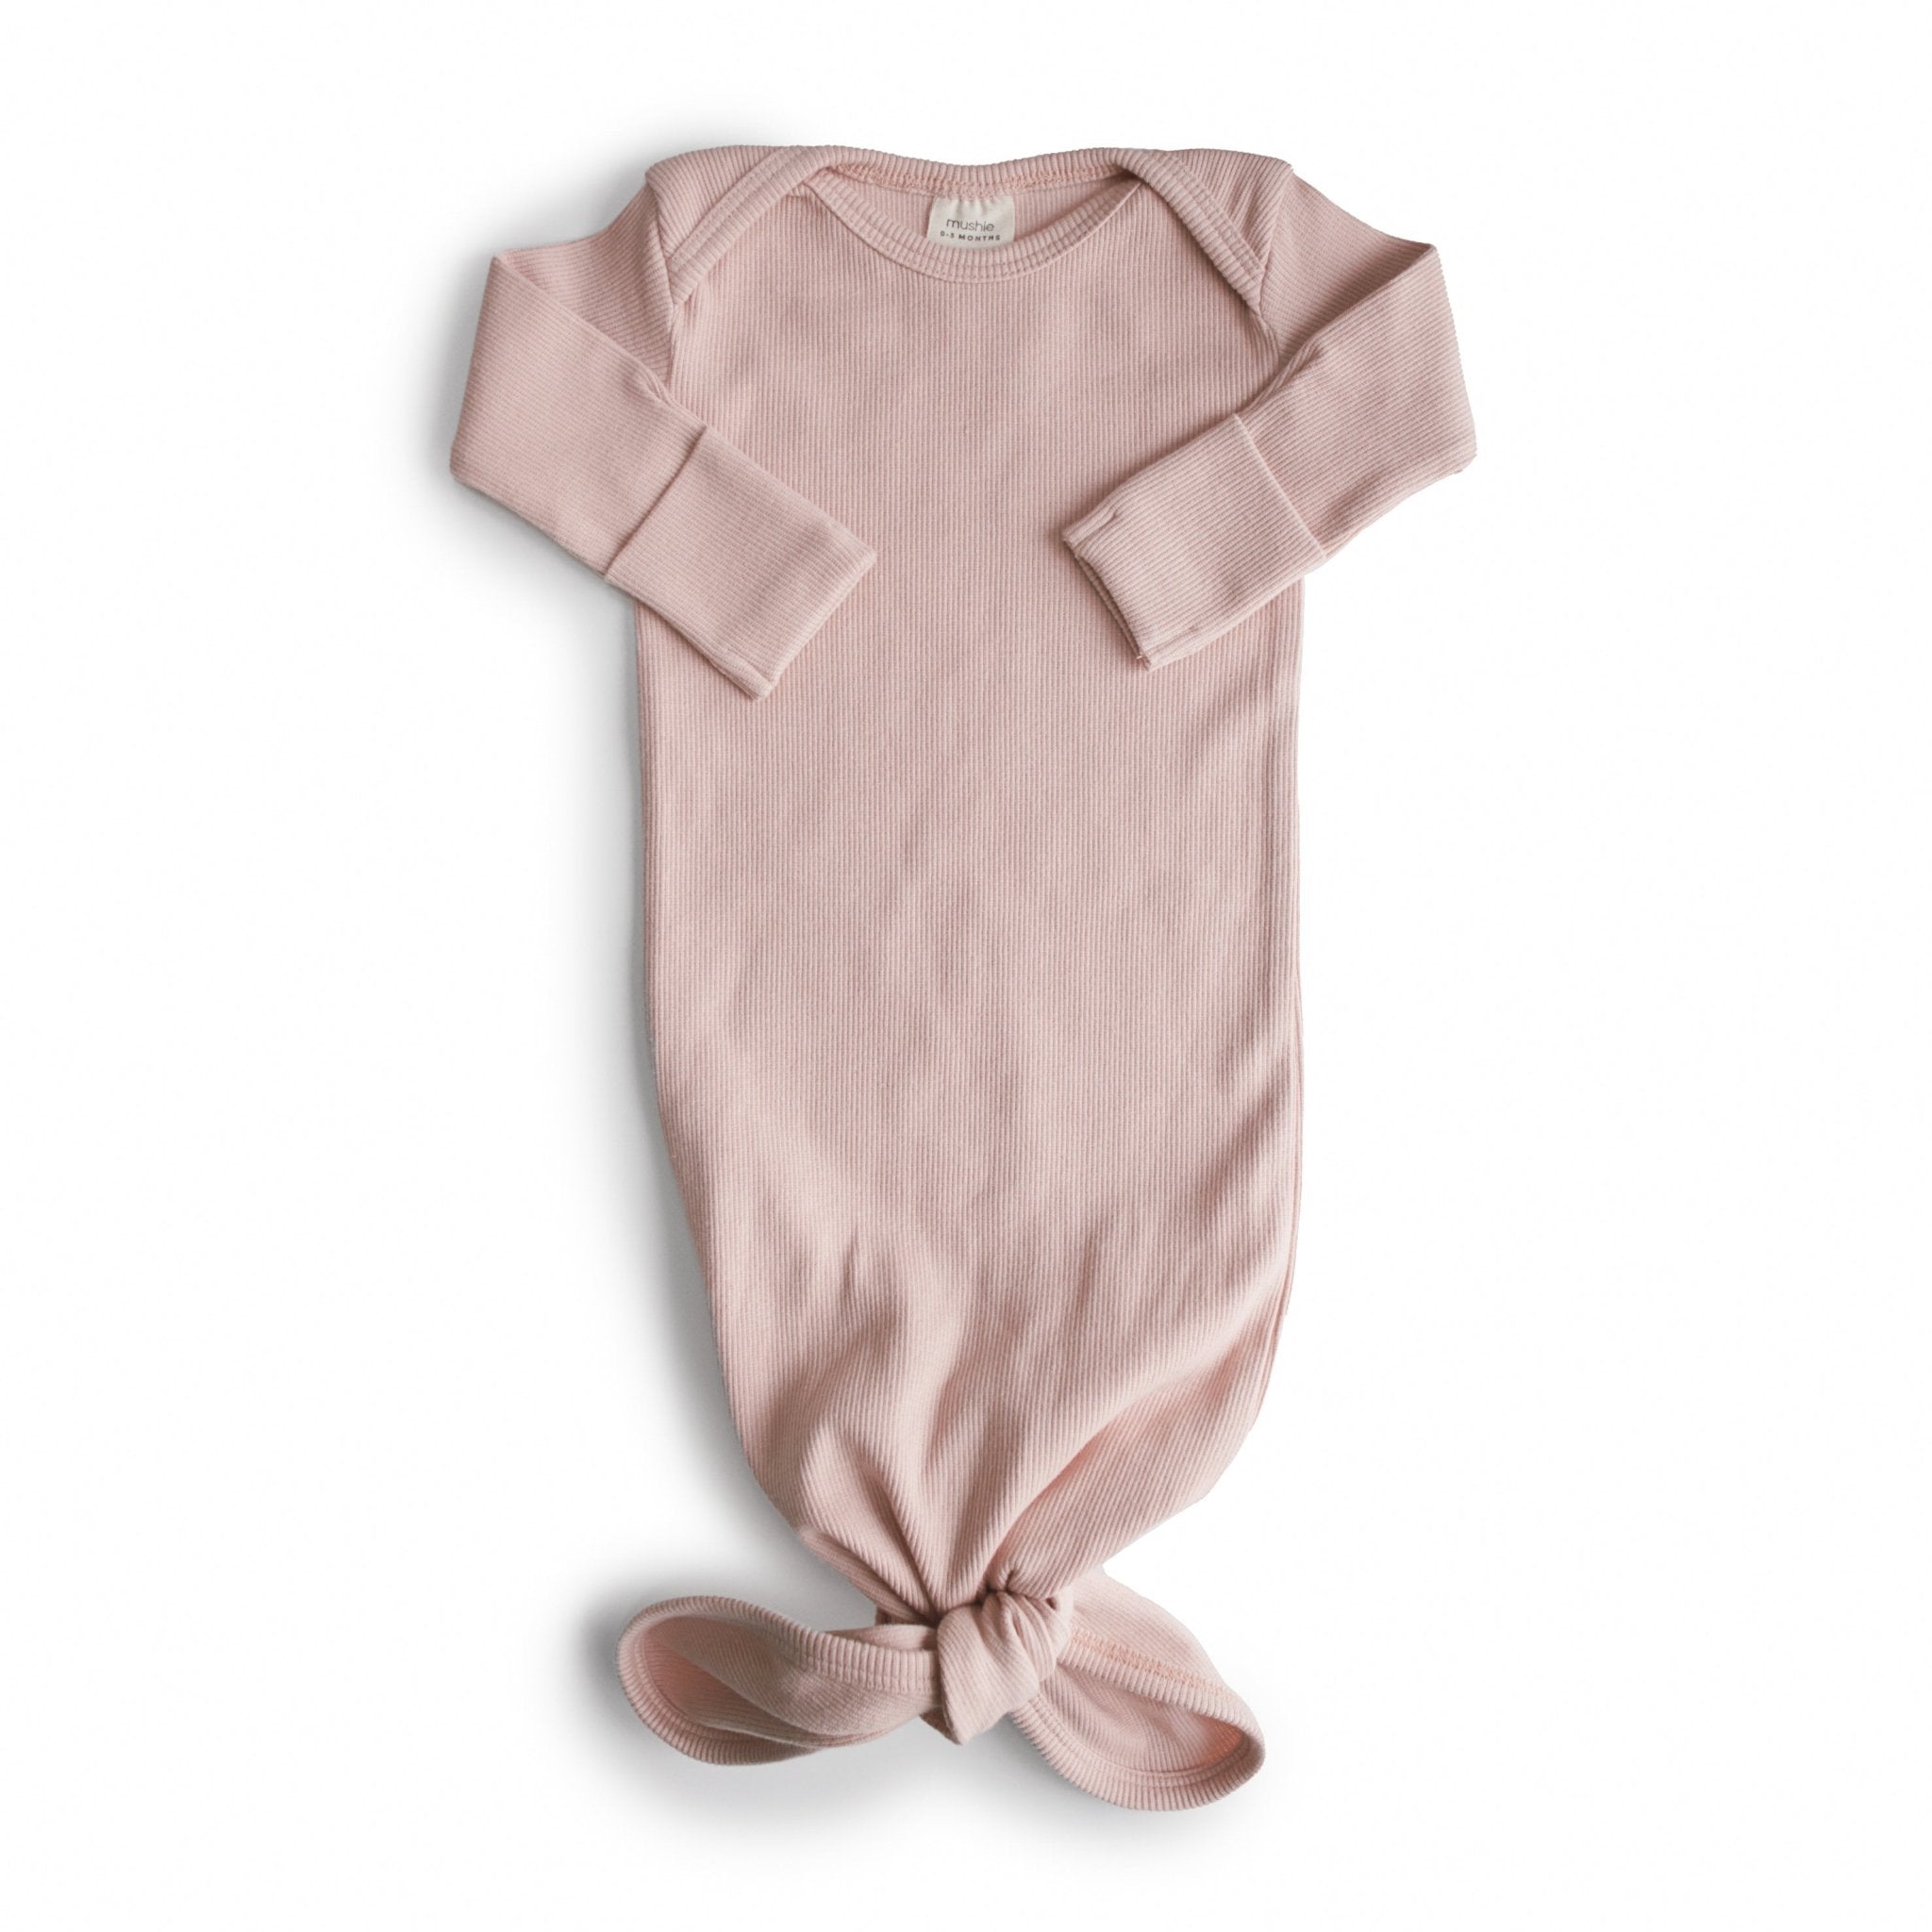 Mushie Ribbed Knotted Baby Gown - ANB Baby -810052465043$20 - $50